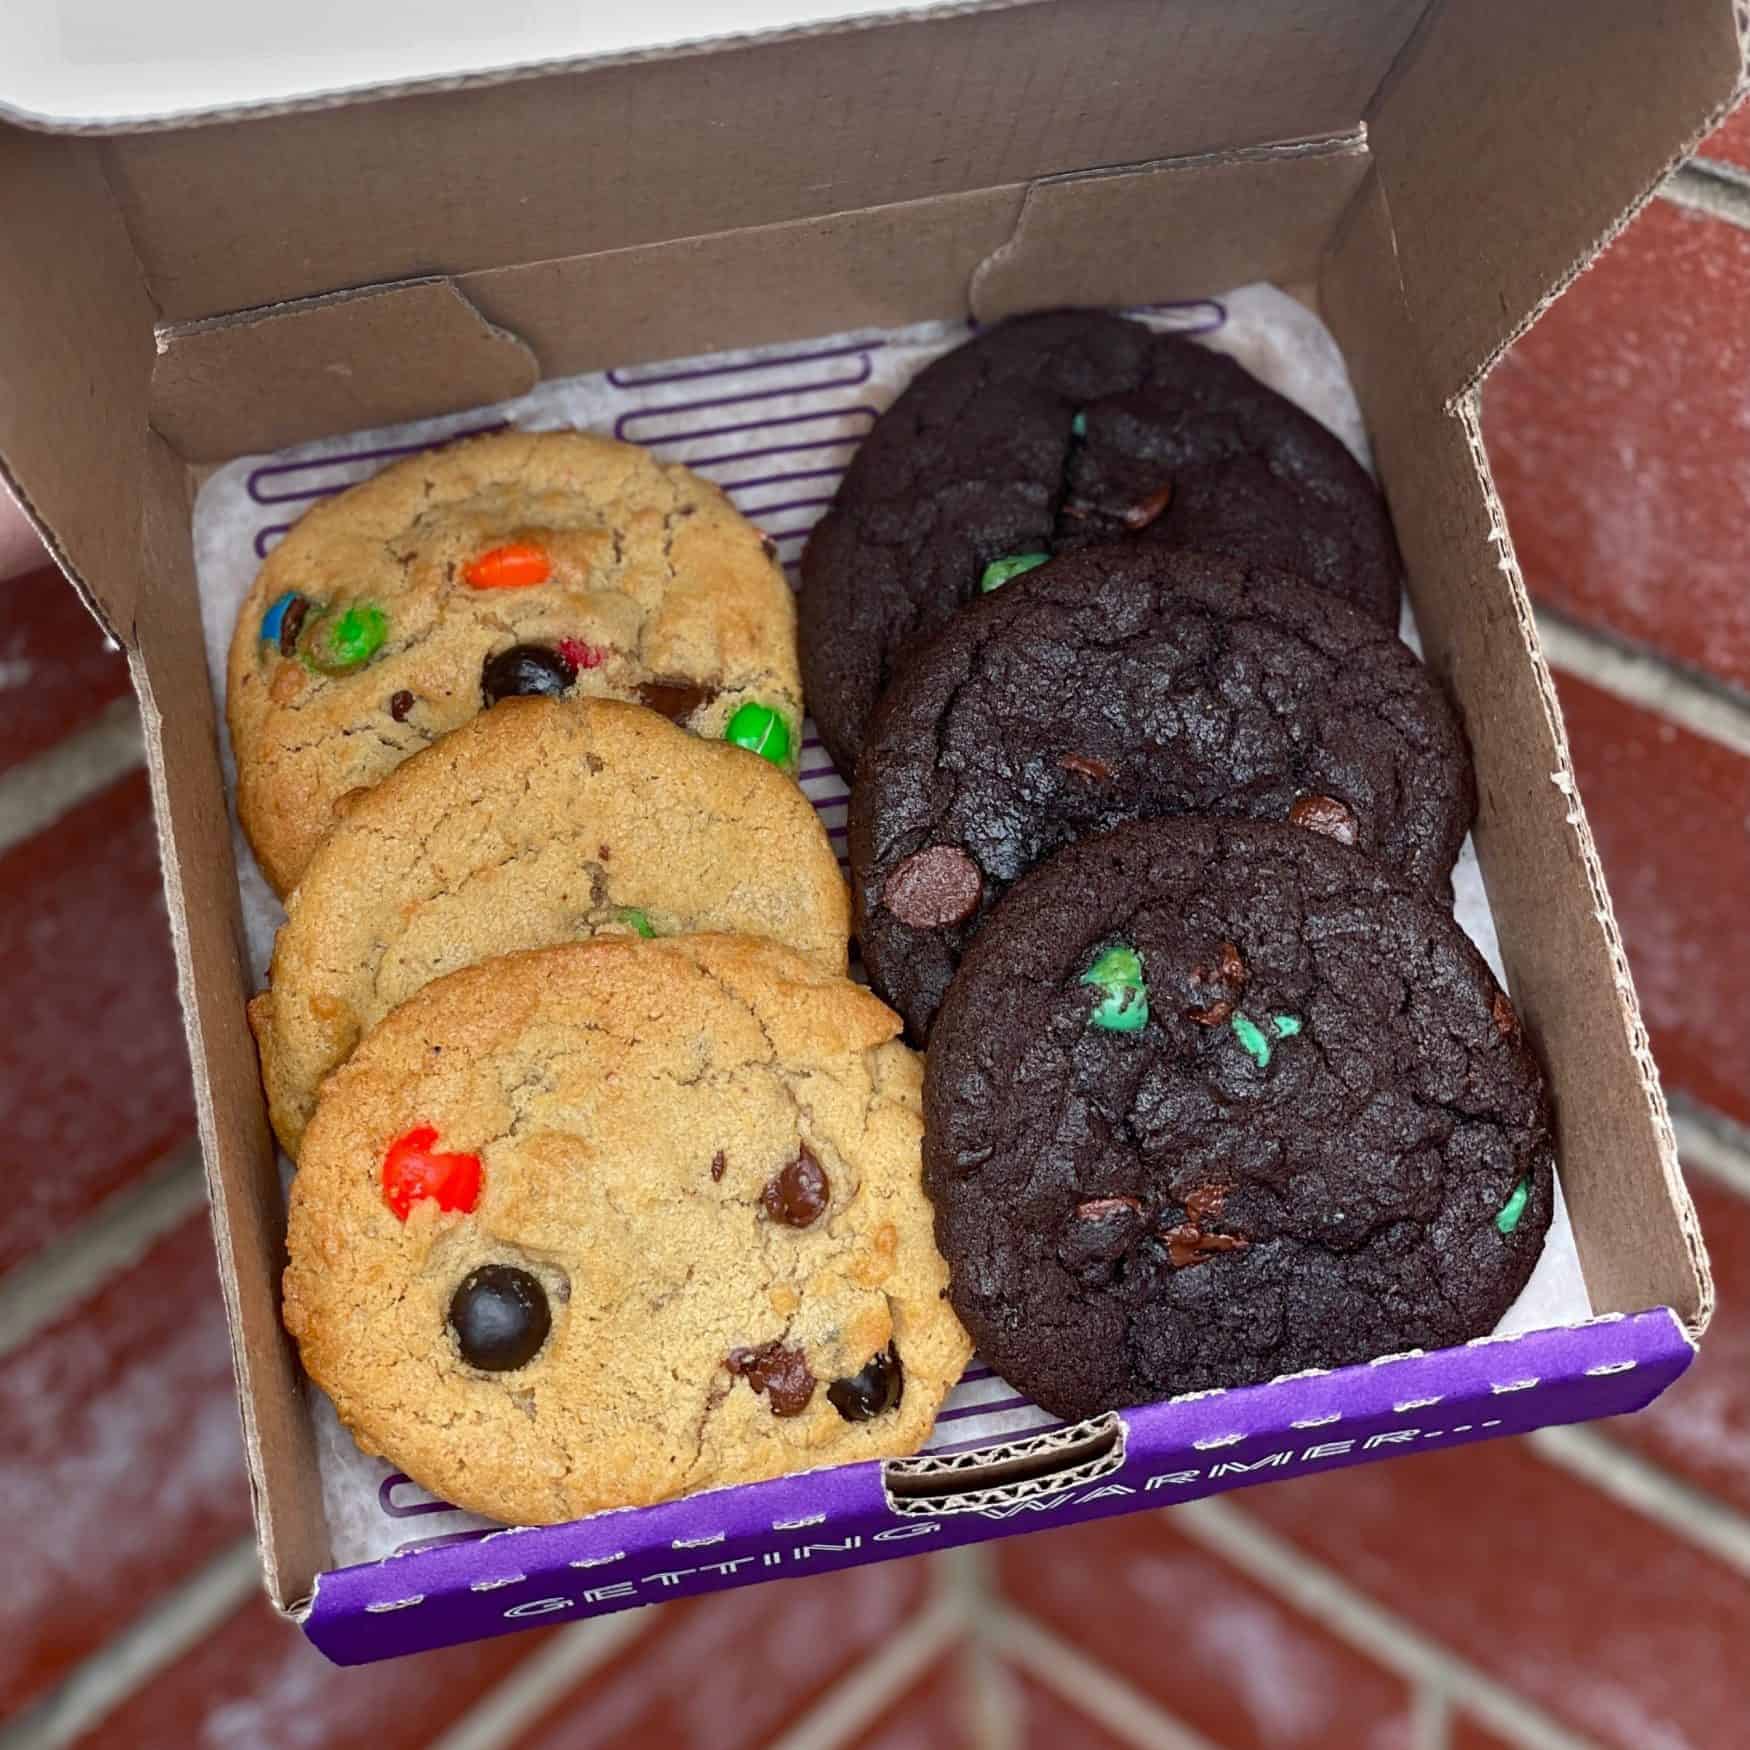 tax day deals and freebies at Insomnia Cookies